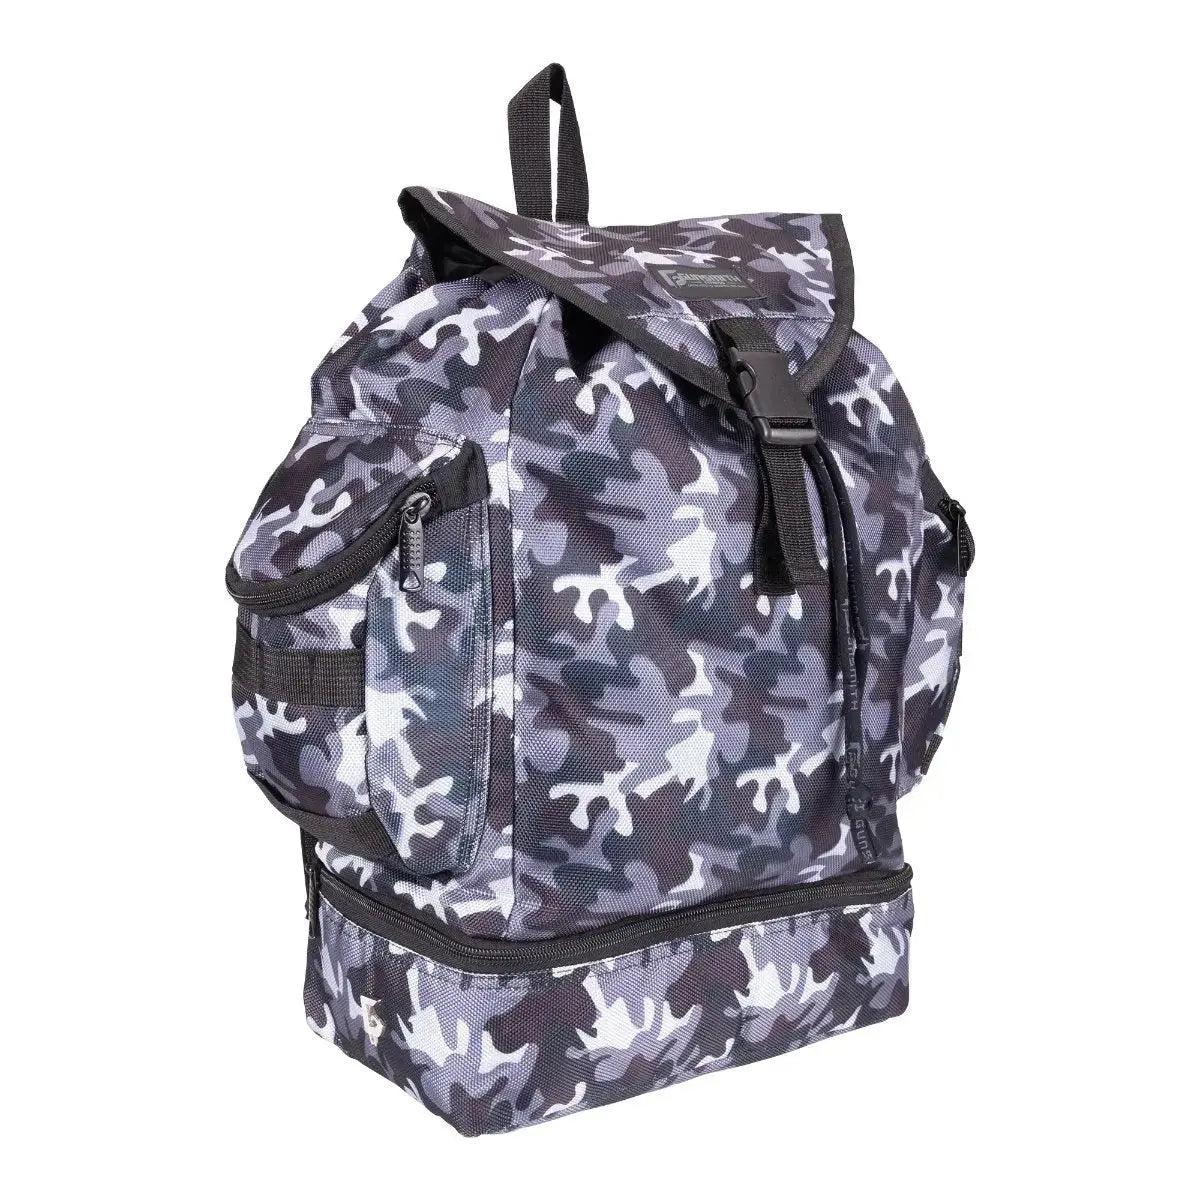 Clearance - Arctic White Camo Backpack - Gunsmith Fitness